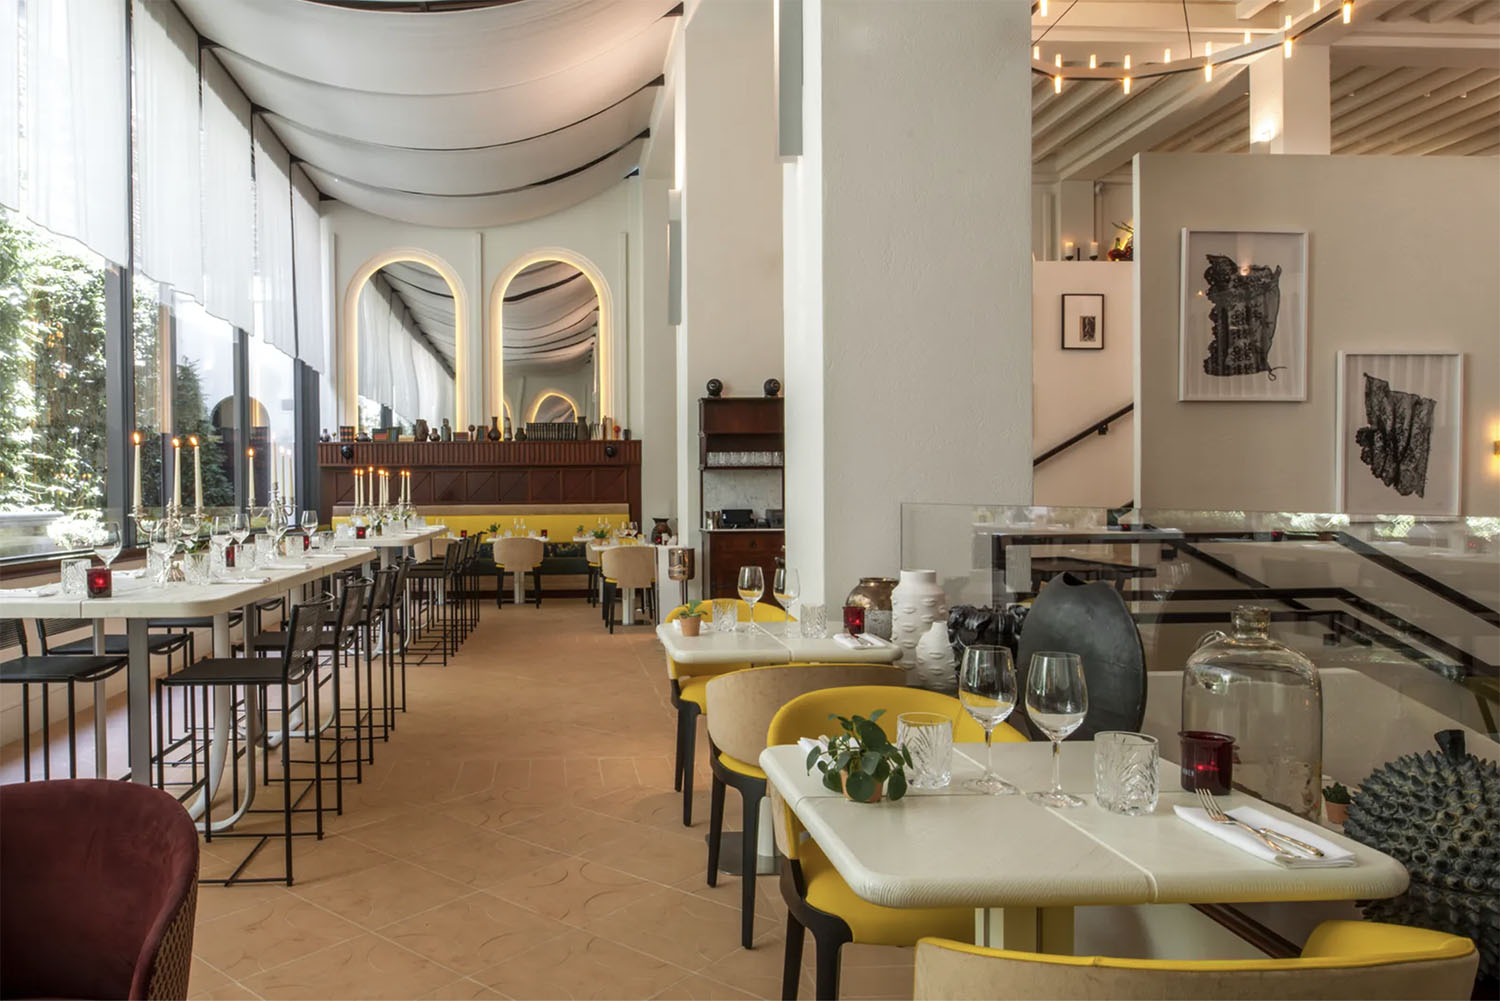 The open-air, high ceiling restaurant at Hotel Sinner with yellow chairs, white marble tables and draped panel canopies along the ceiling